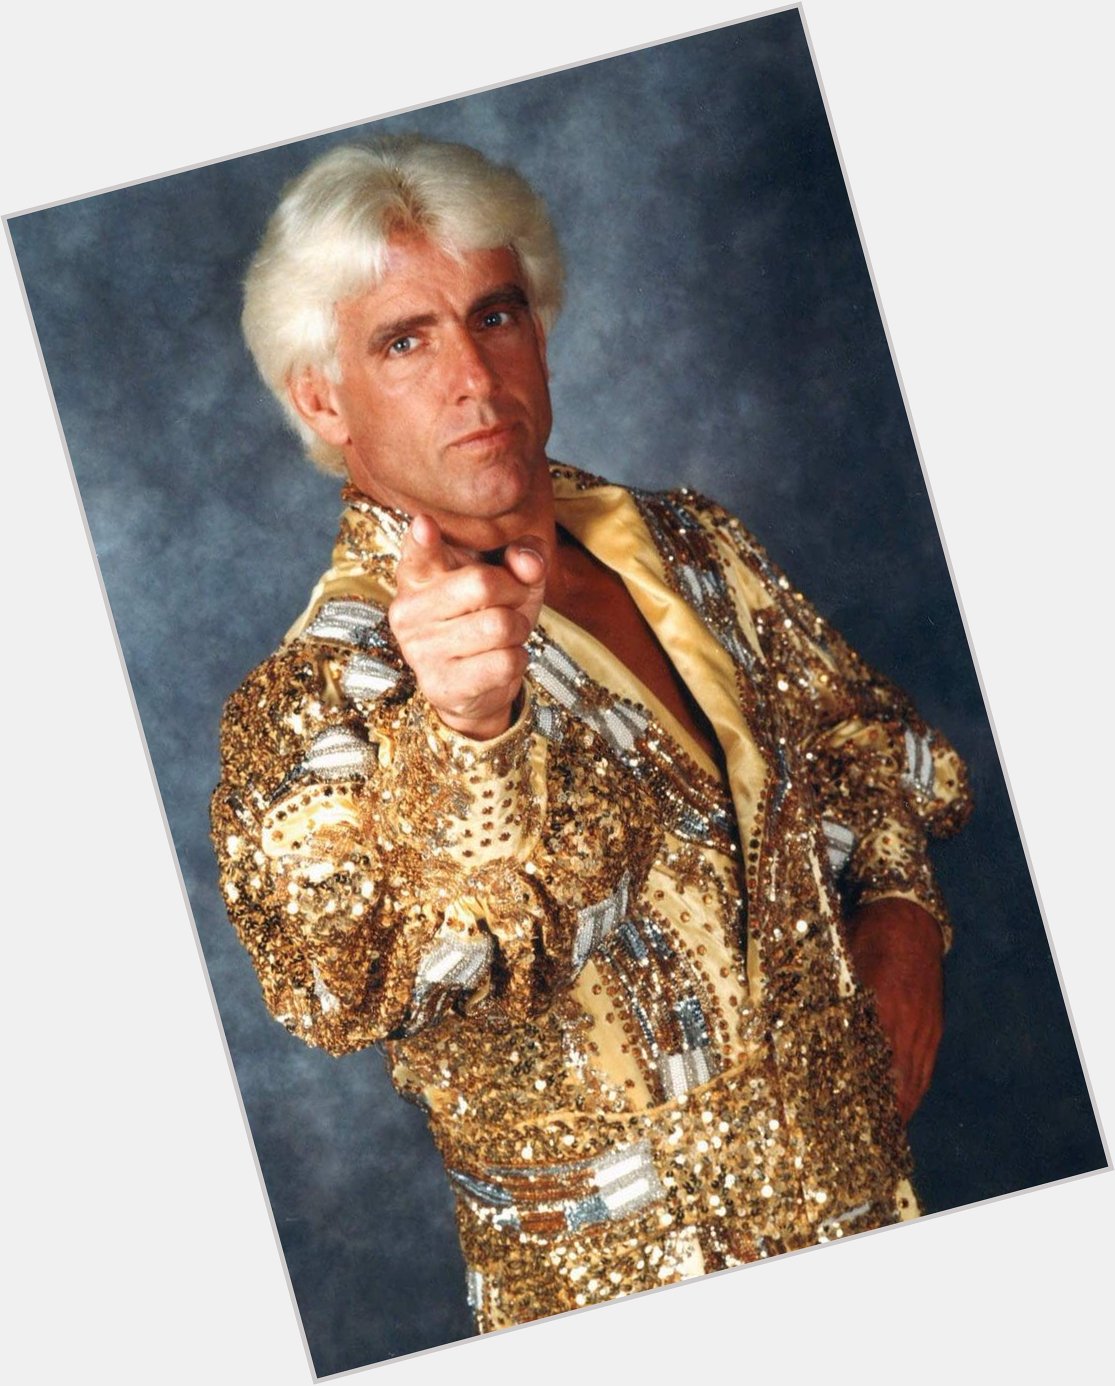 Happy Birthday to Ric Flair, who turns 66 today! 